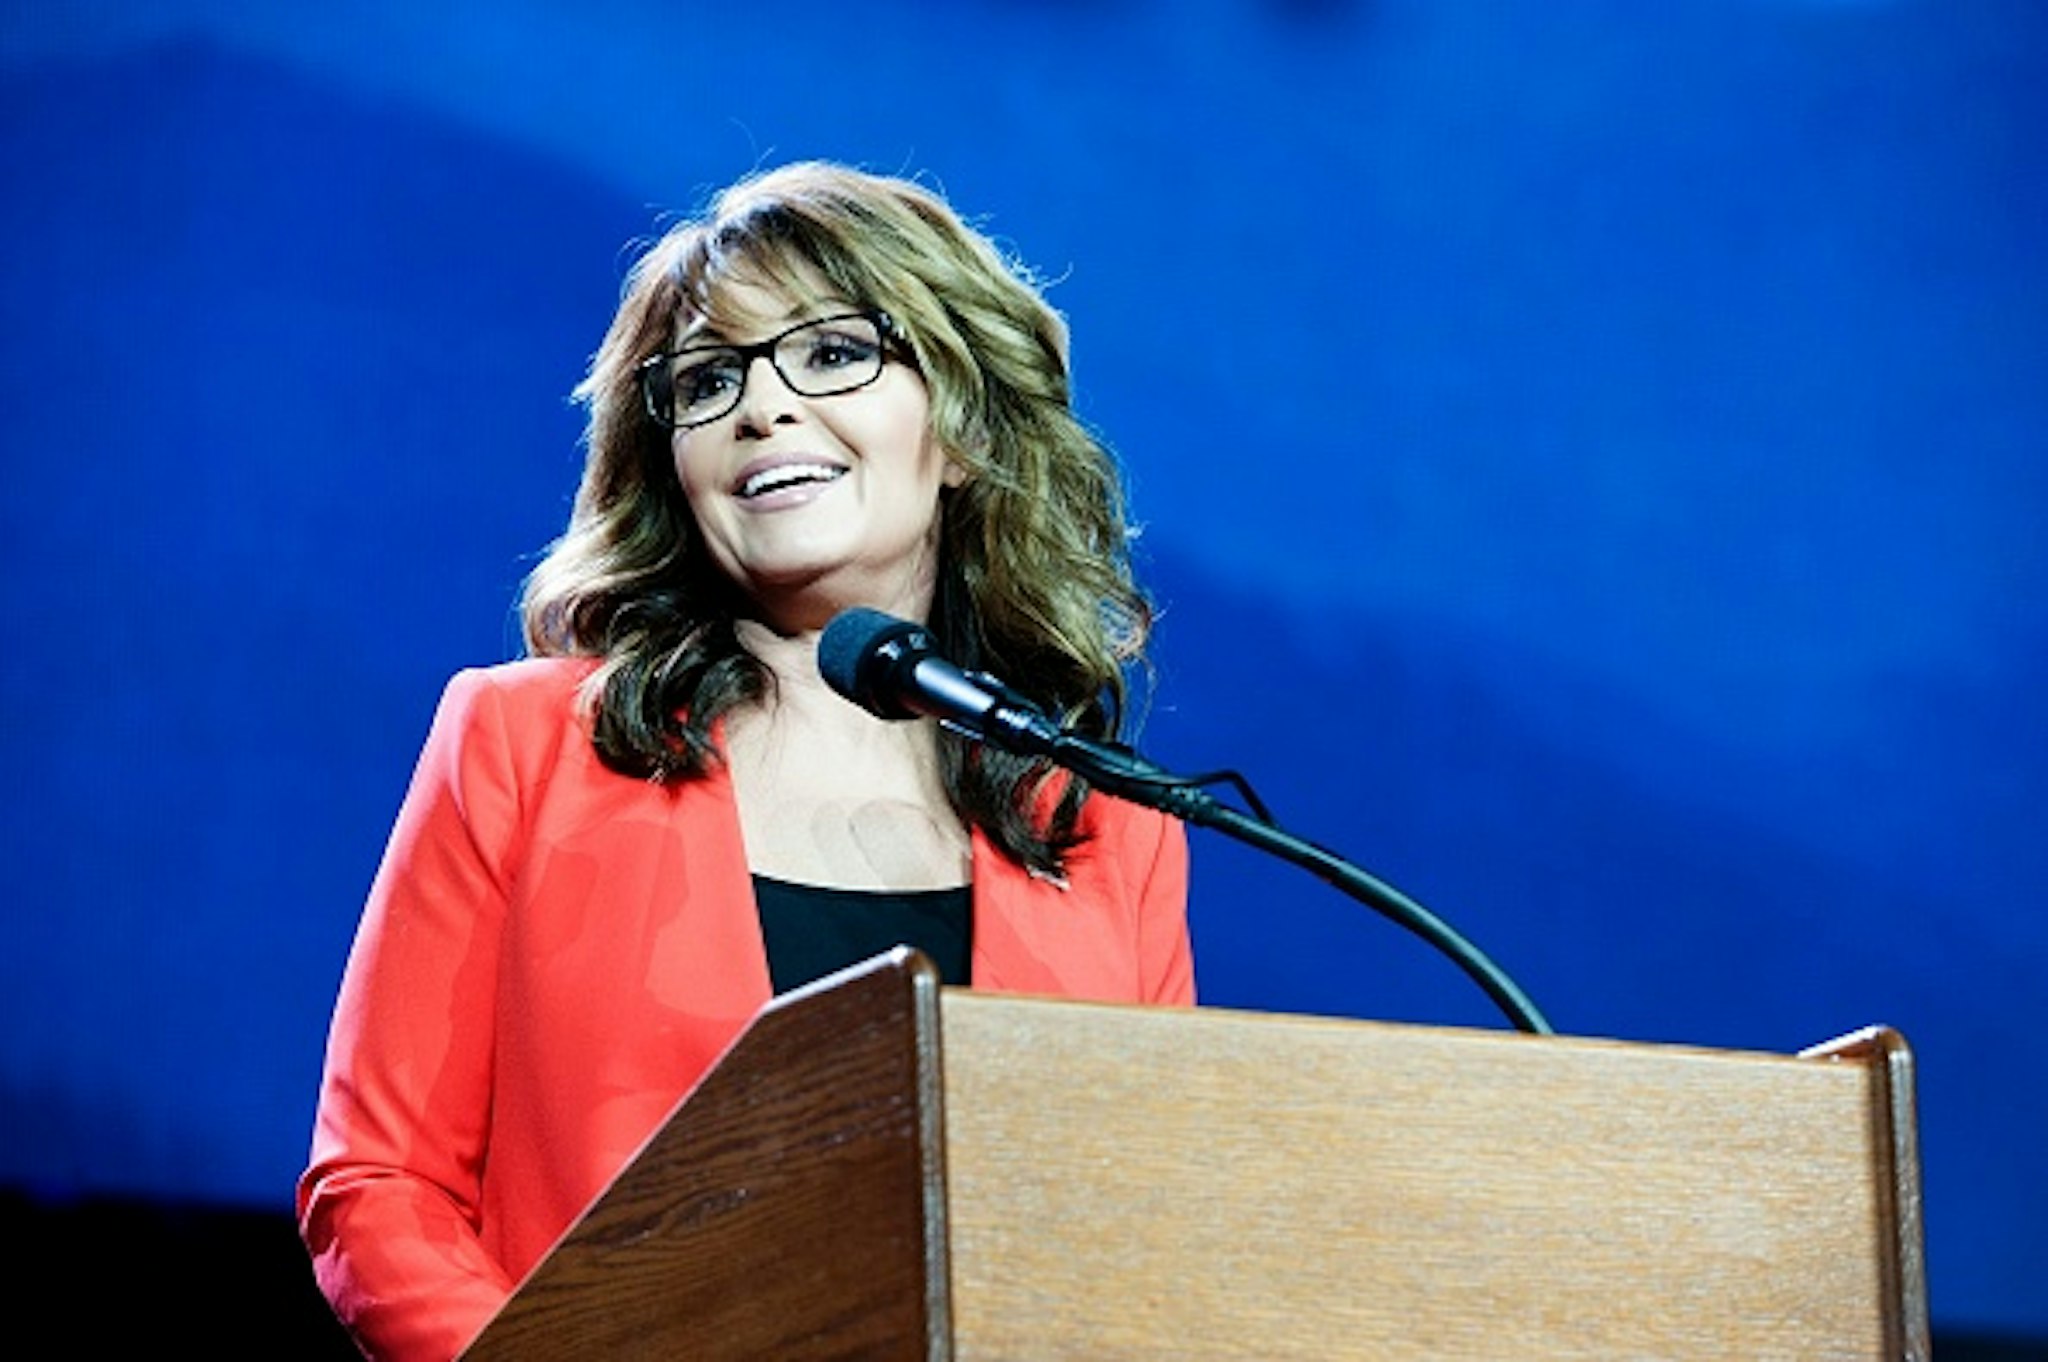 Former Alaska Governor and 2008 Republican party Vice Presidential nominee Sarah Palin addresses the audience at the 2016 Western Conservative Summit in Denver, Colorado on July 1, 2016. / AFP / Jason Connolly